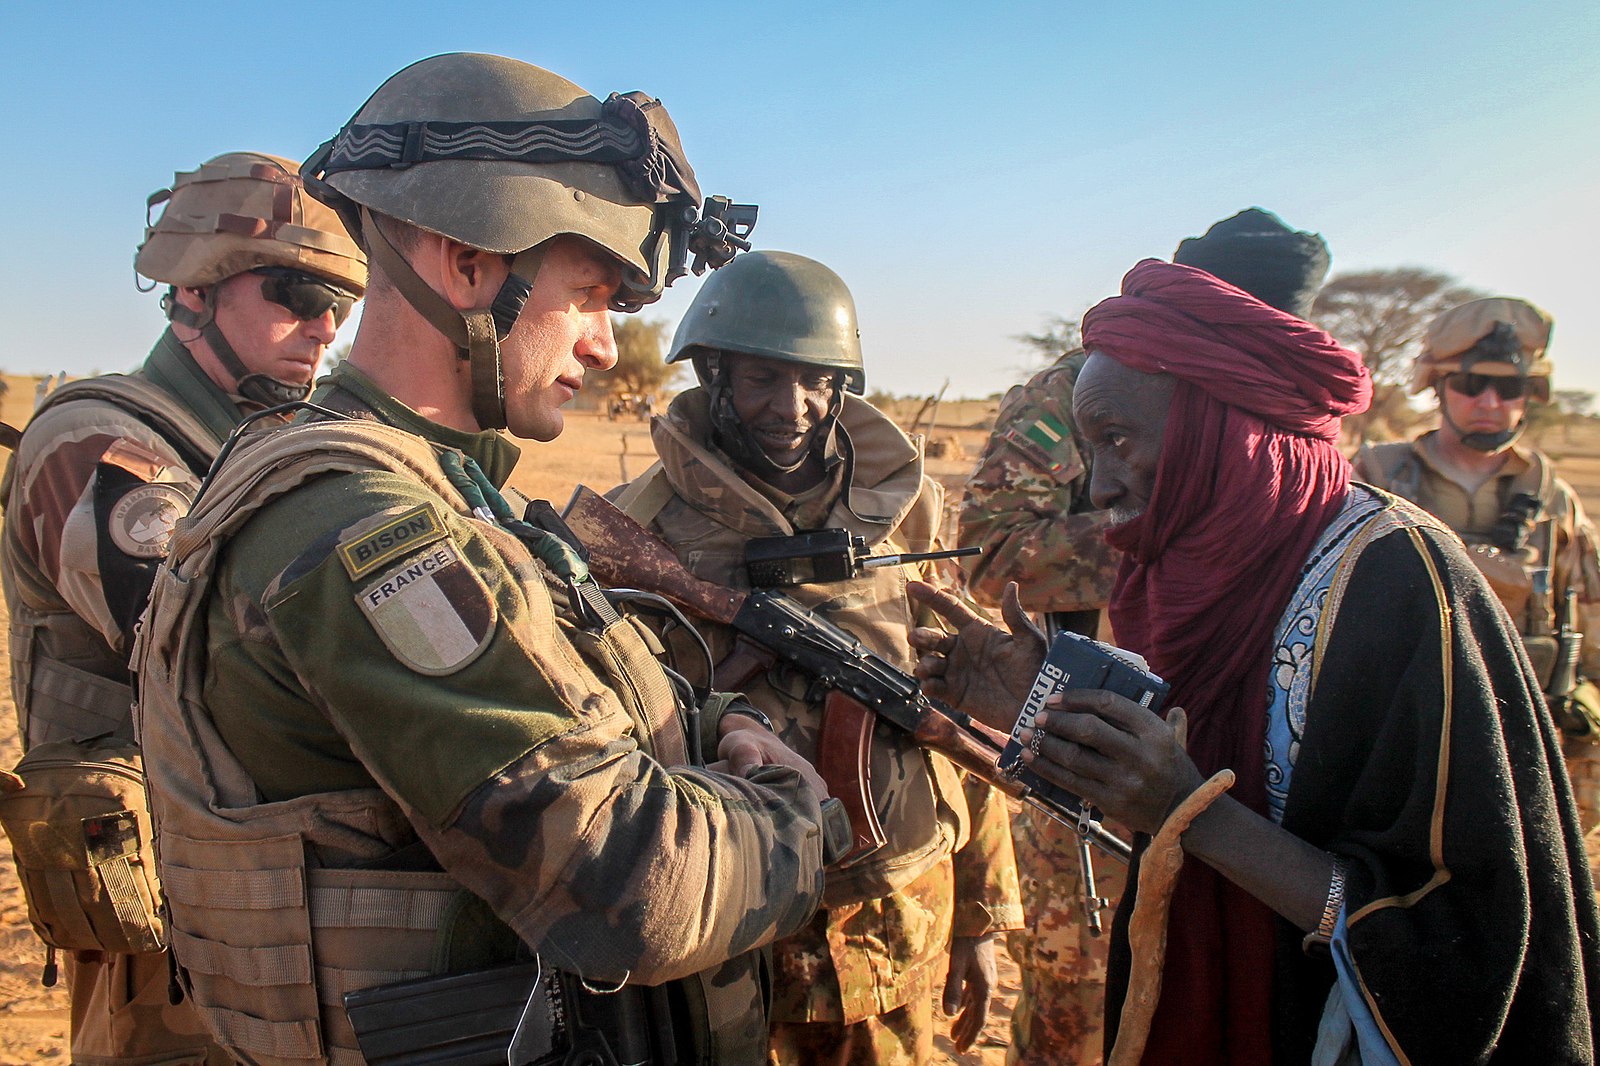 A French soldier talking with a Malian civilian in the desert.